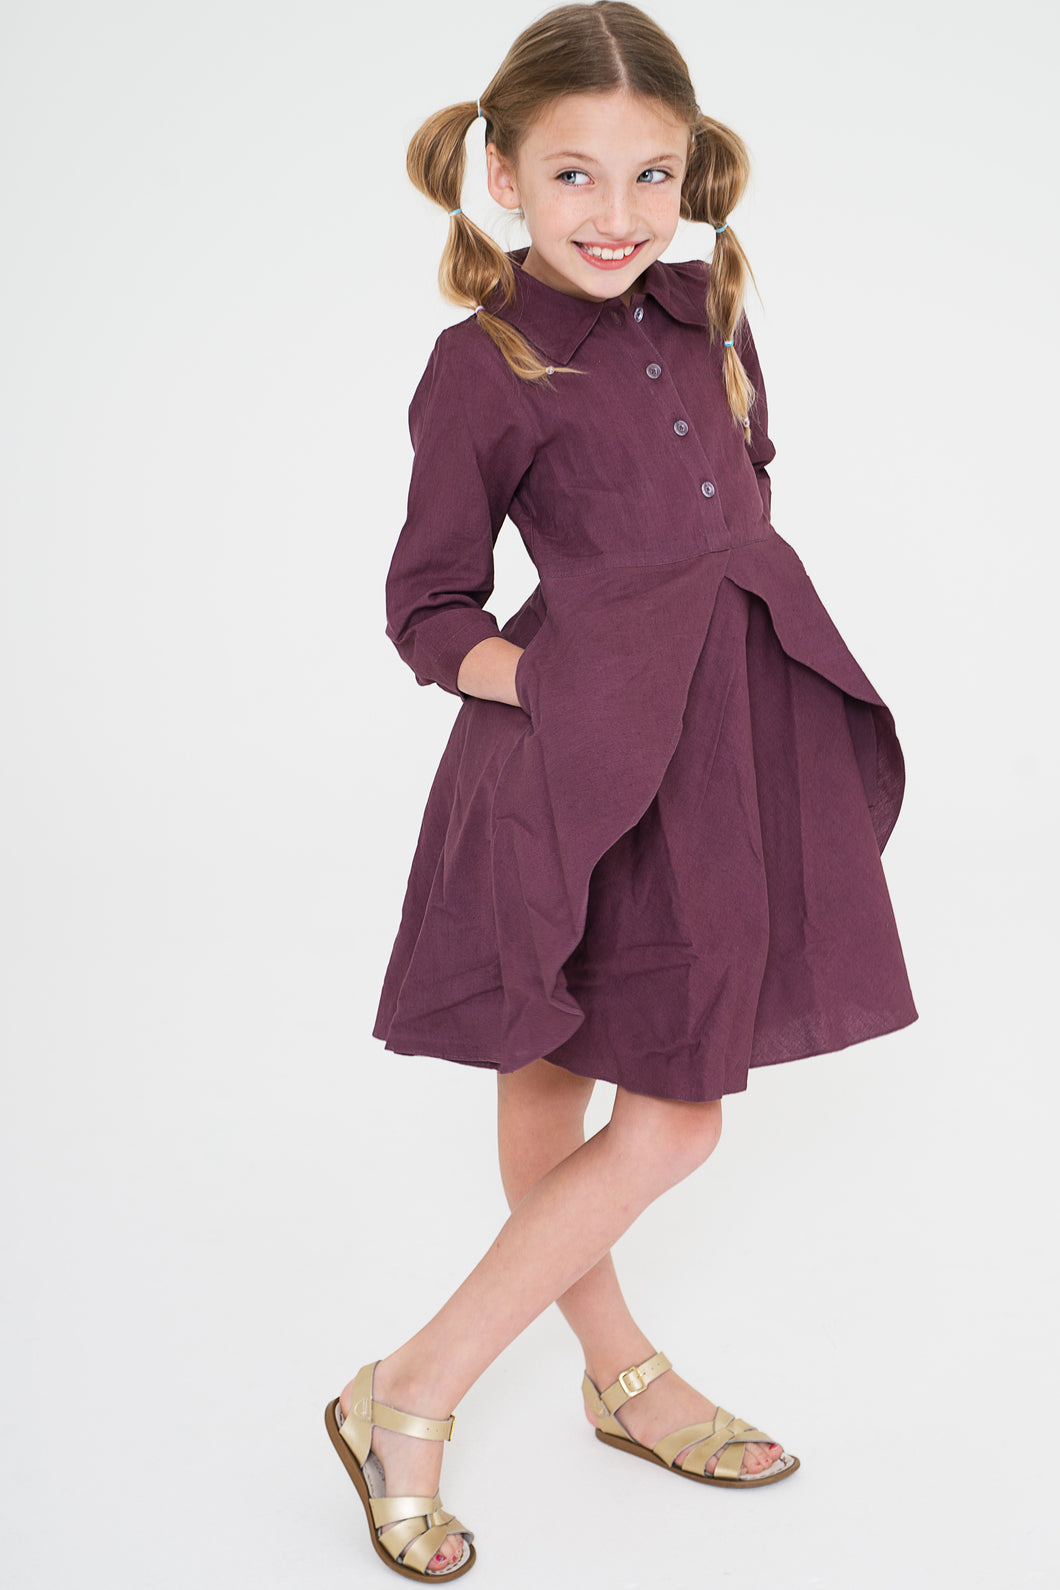 Aubergine Shirt Dress With Flounce Details and Pockets - Kids Wholesale Boutique Clothing, Dress - Girls Dresses, Yo Baby Wholesale - Yo Baby